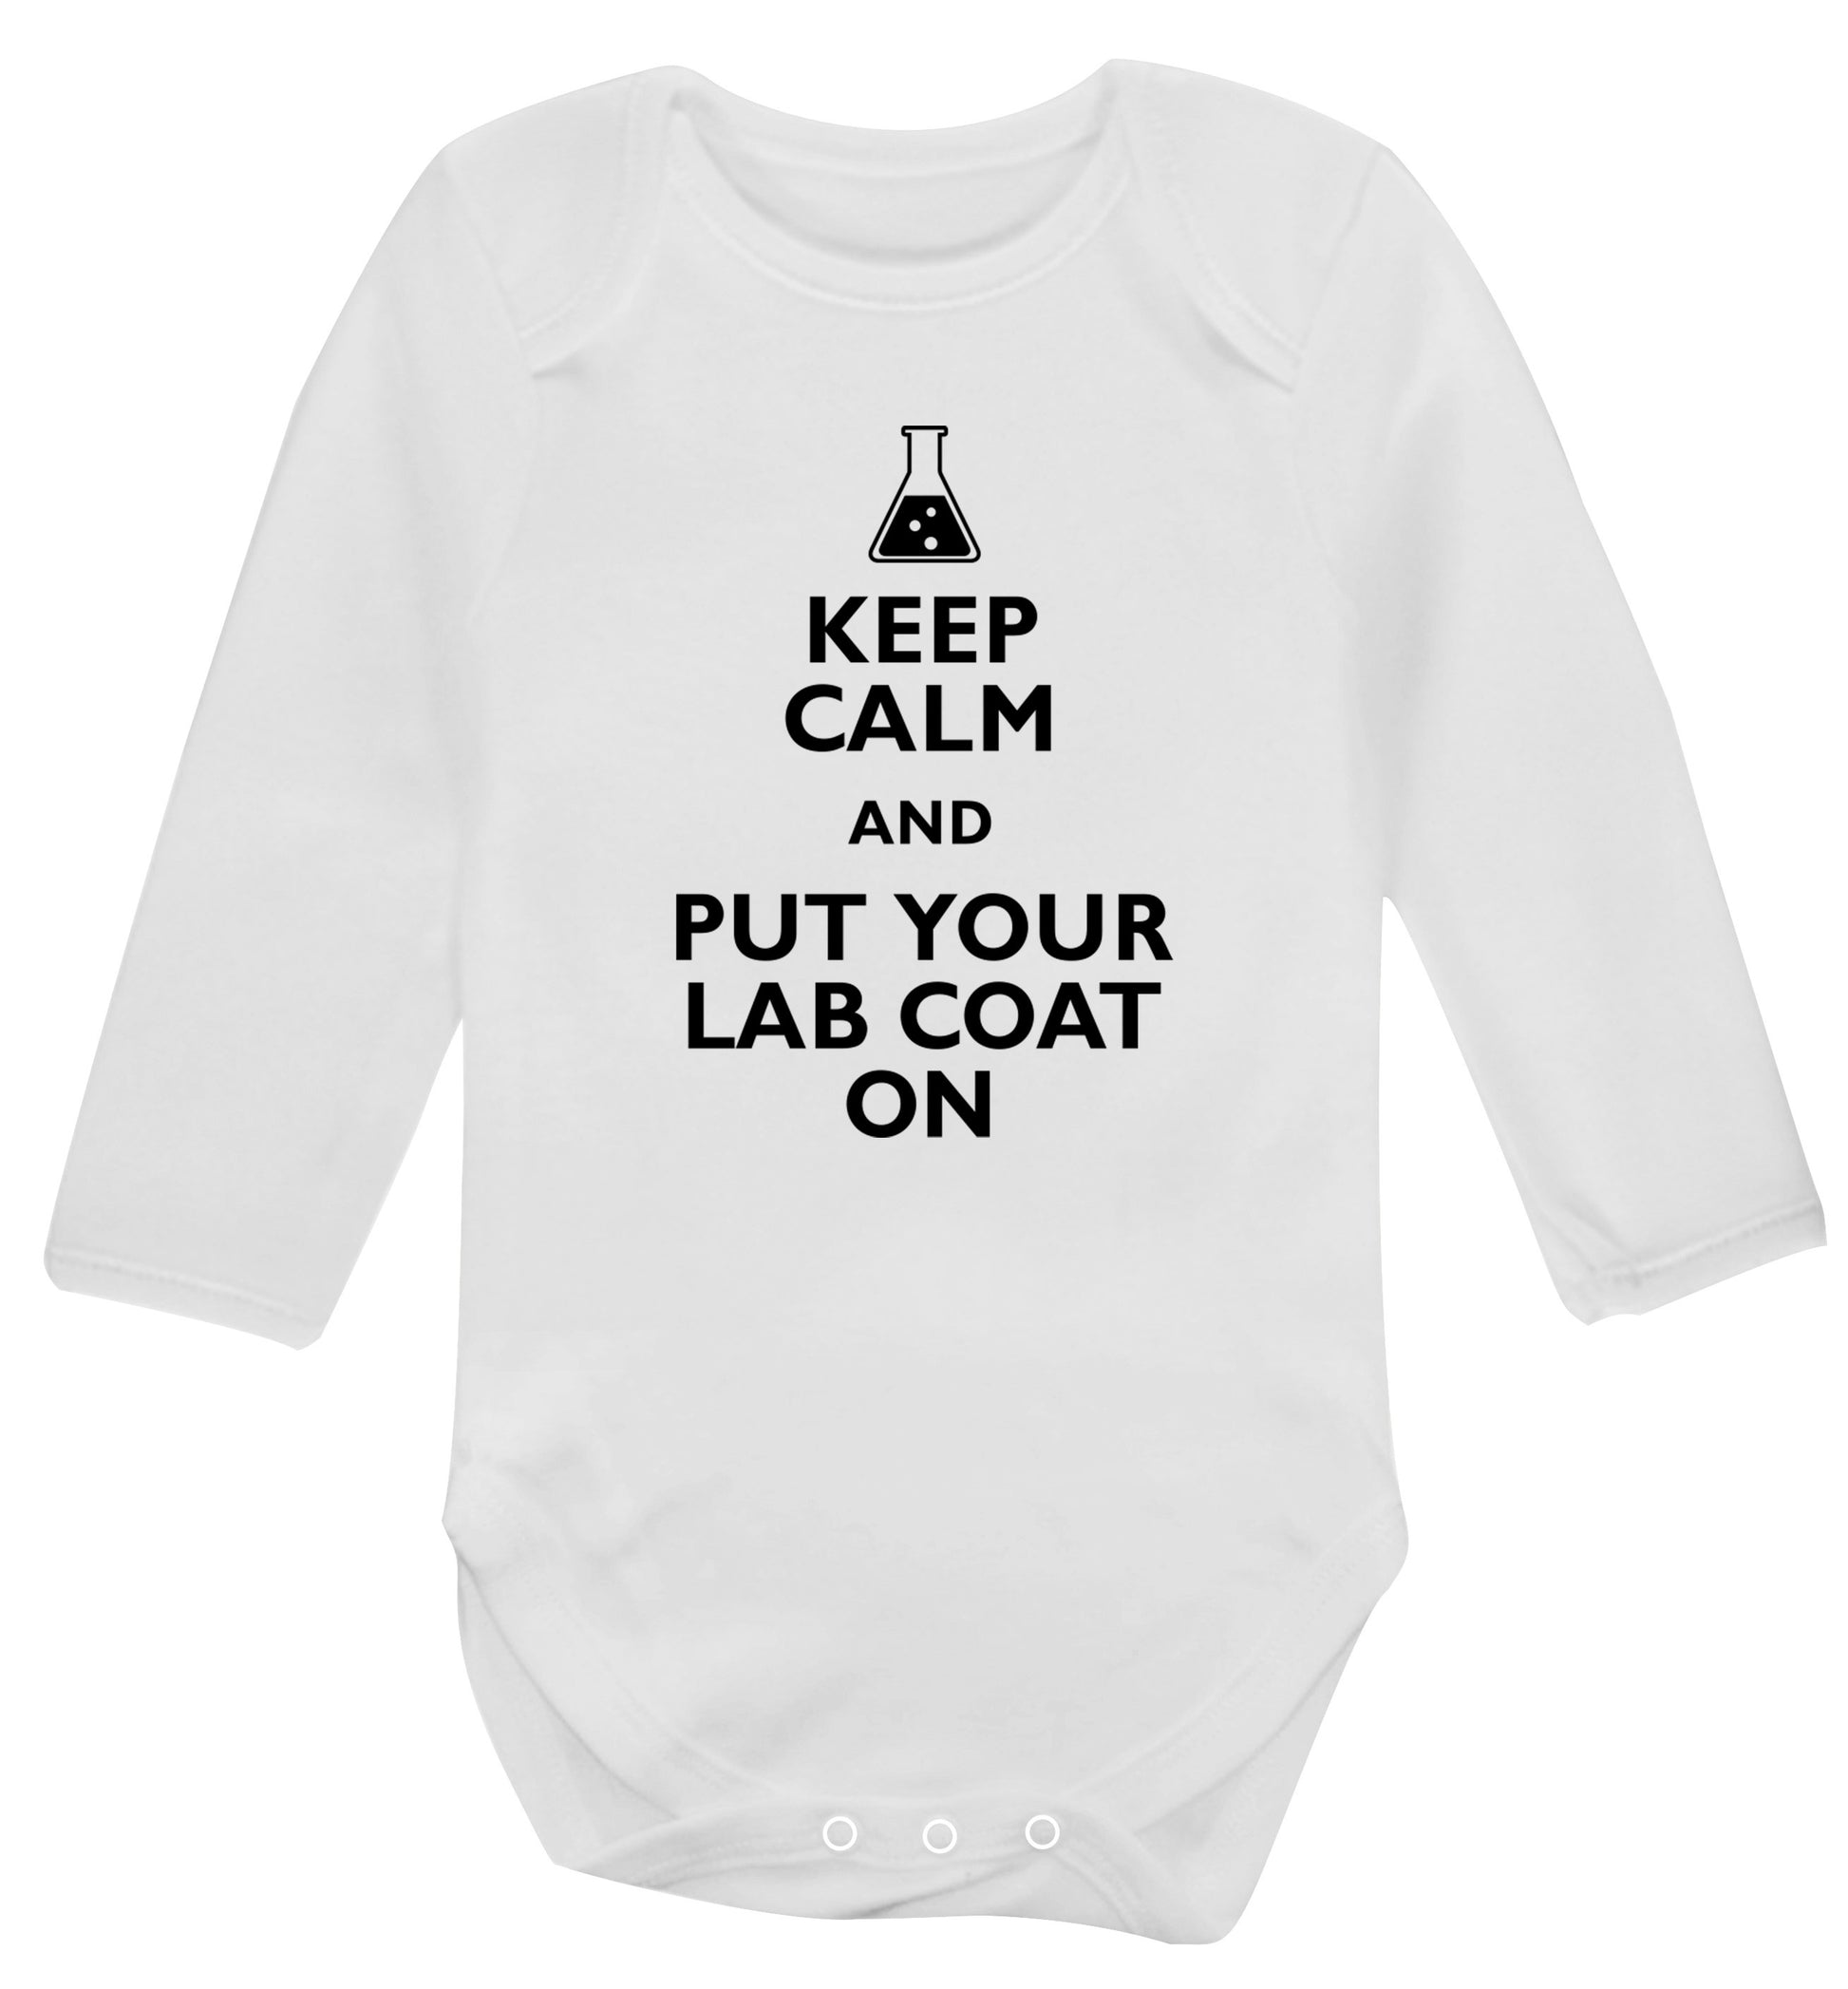 Keep calm and put your lab coat on Baby Vest long sleeved white 6-12 months